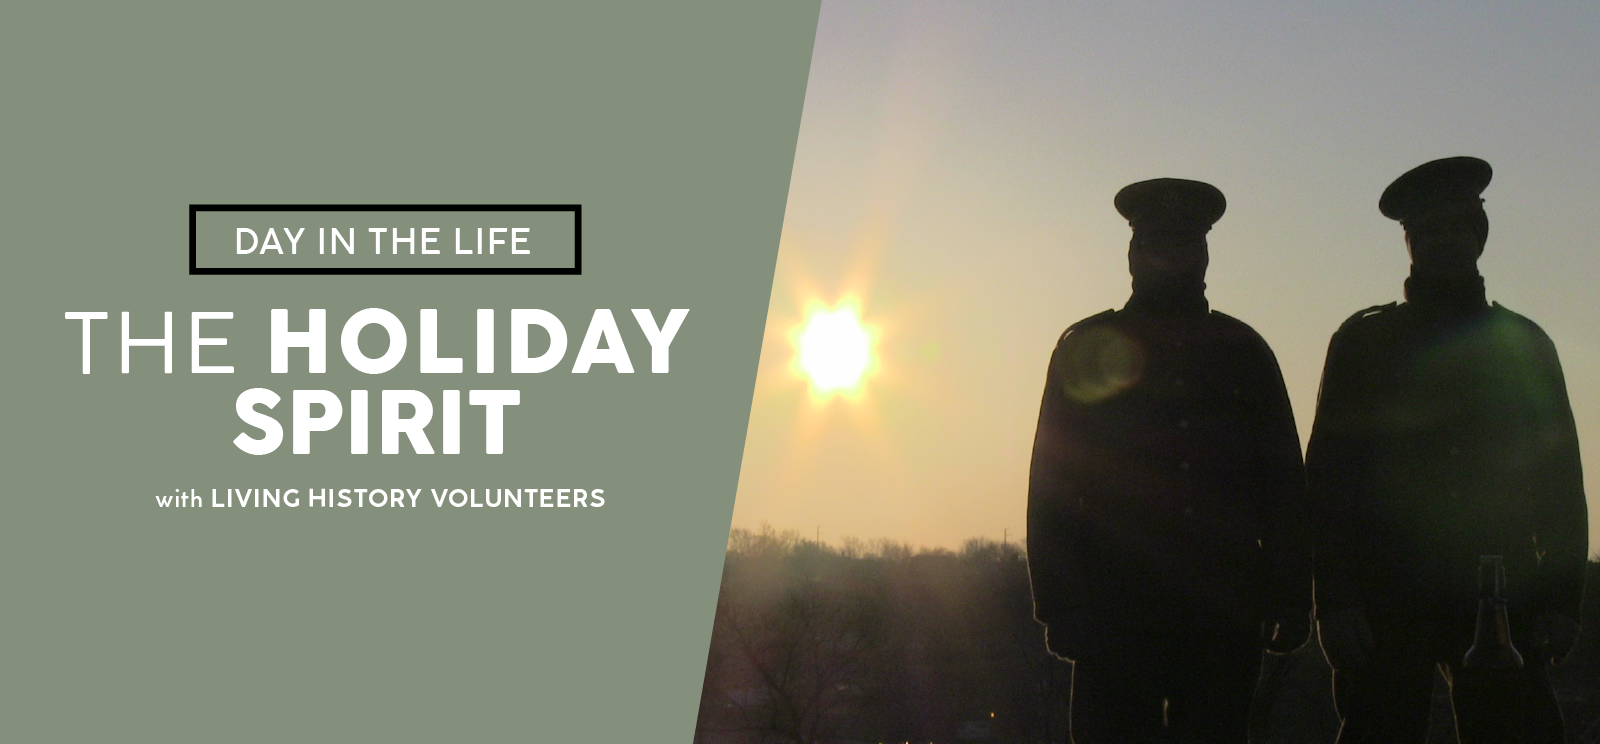 Image: Two people in WWI uniform stand silhouetted against a sunrise. Text: Day in the Life / The Holiday Spirit